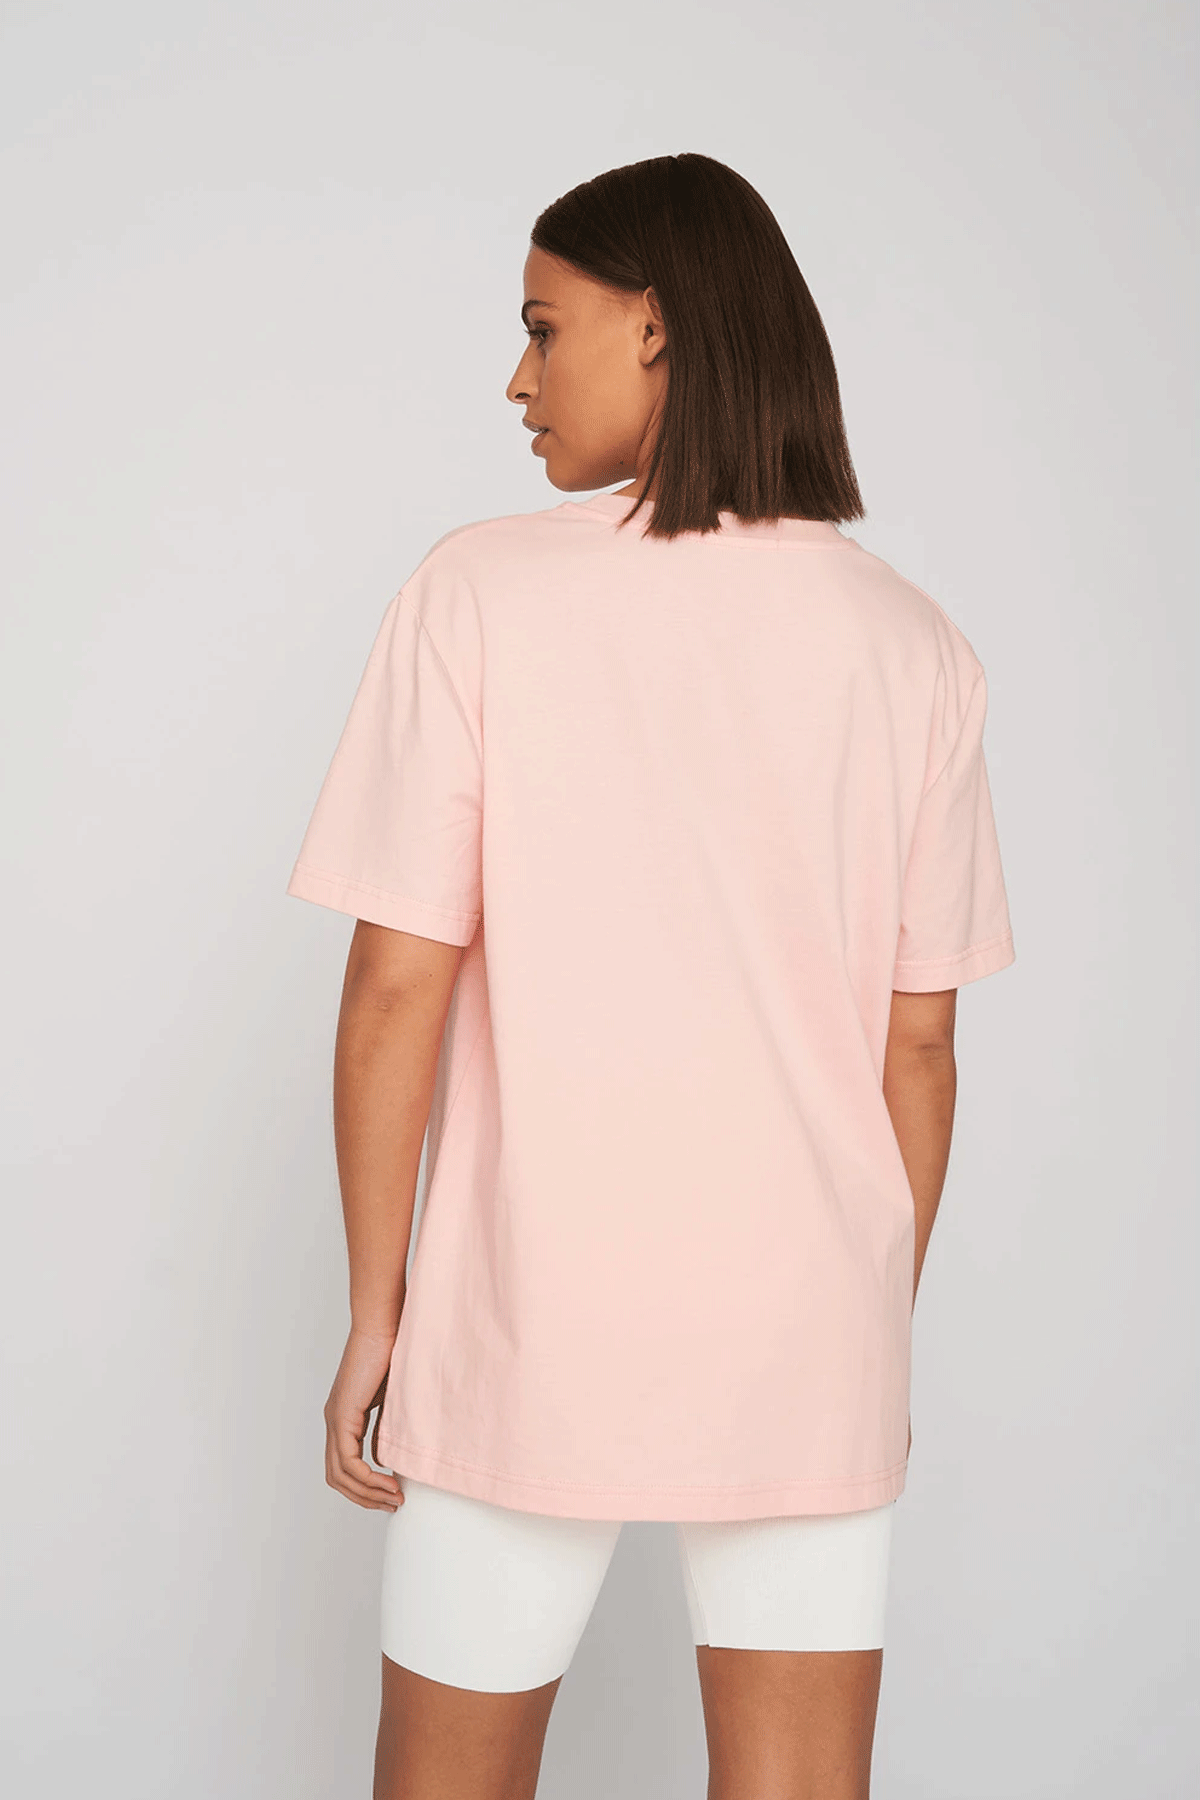 By Johnny Johnny Rush Tee Pink White